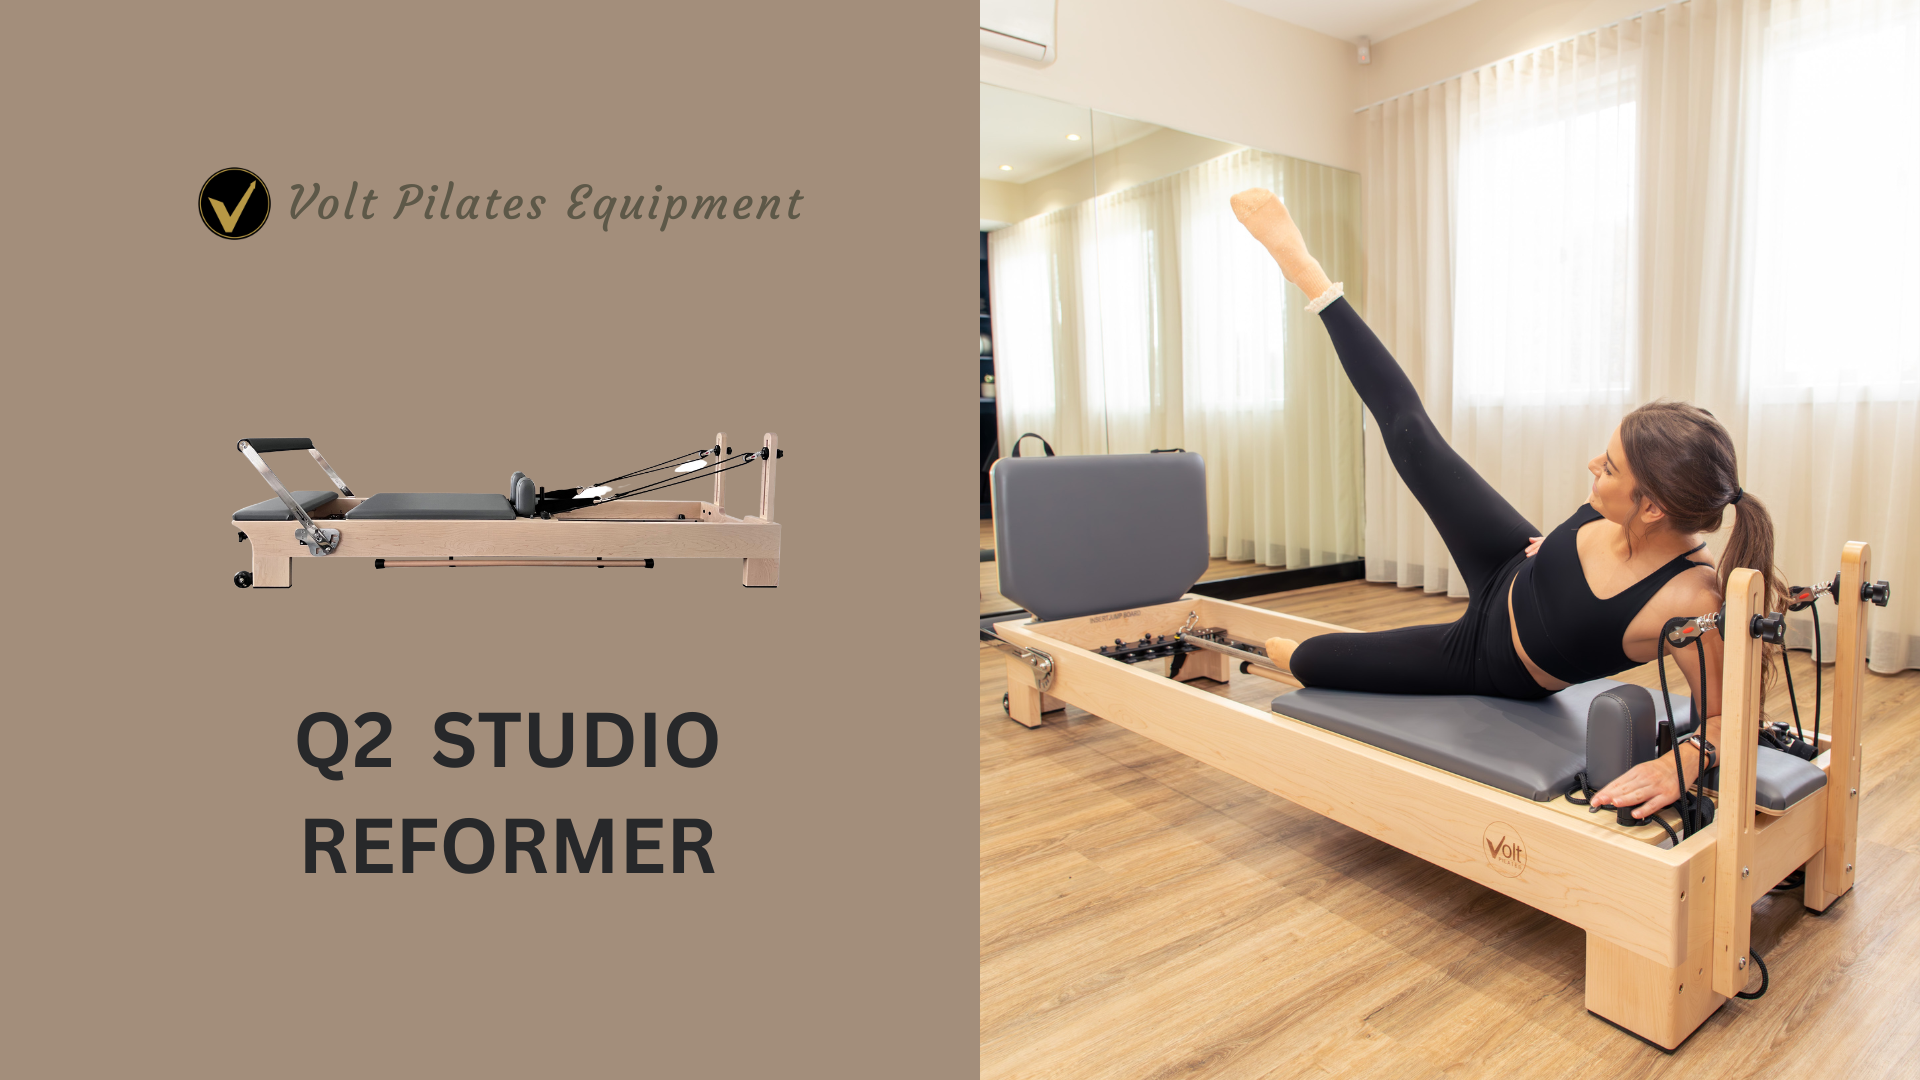 Pilates Equipment - What is a Reformer?